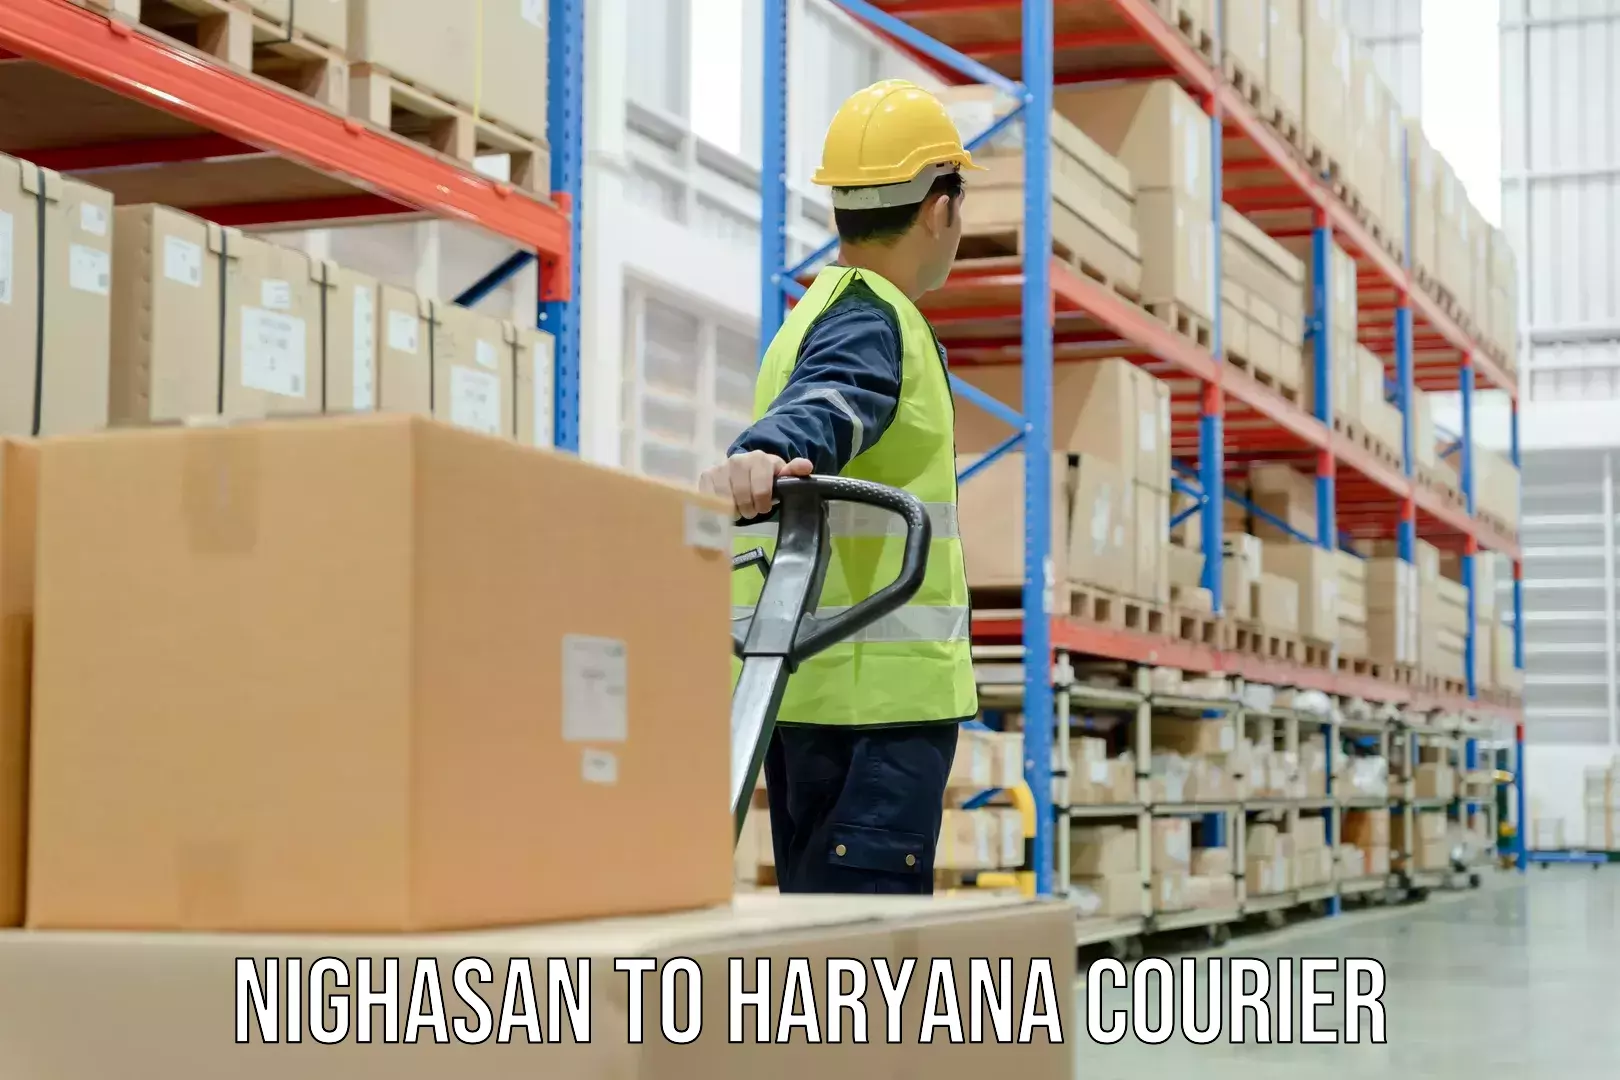 Cash on delivery service Nighasan to Haryana